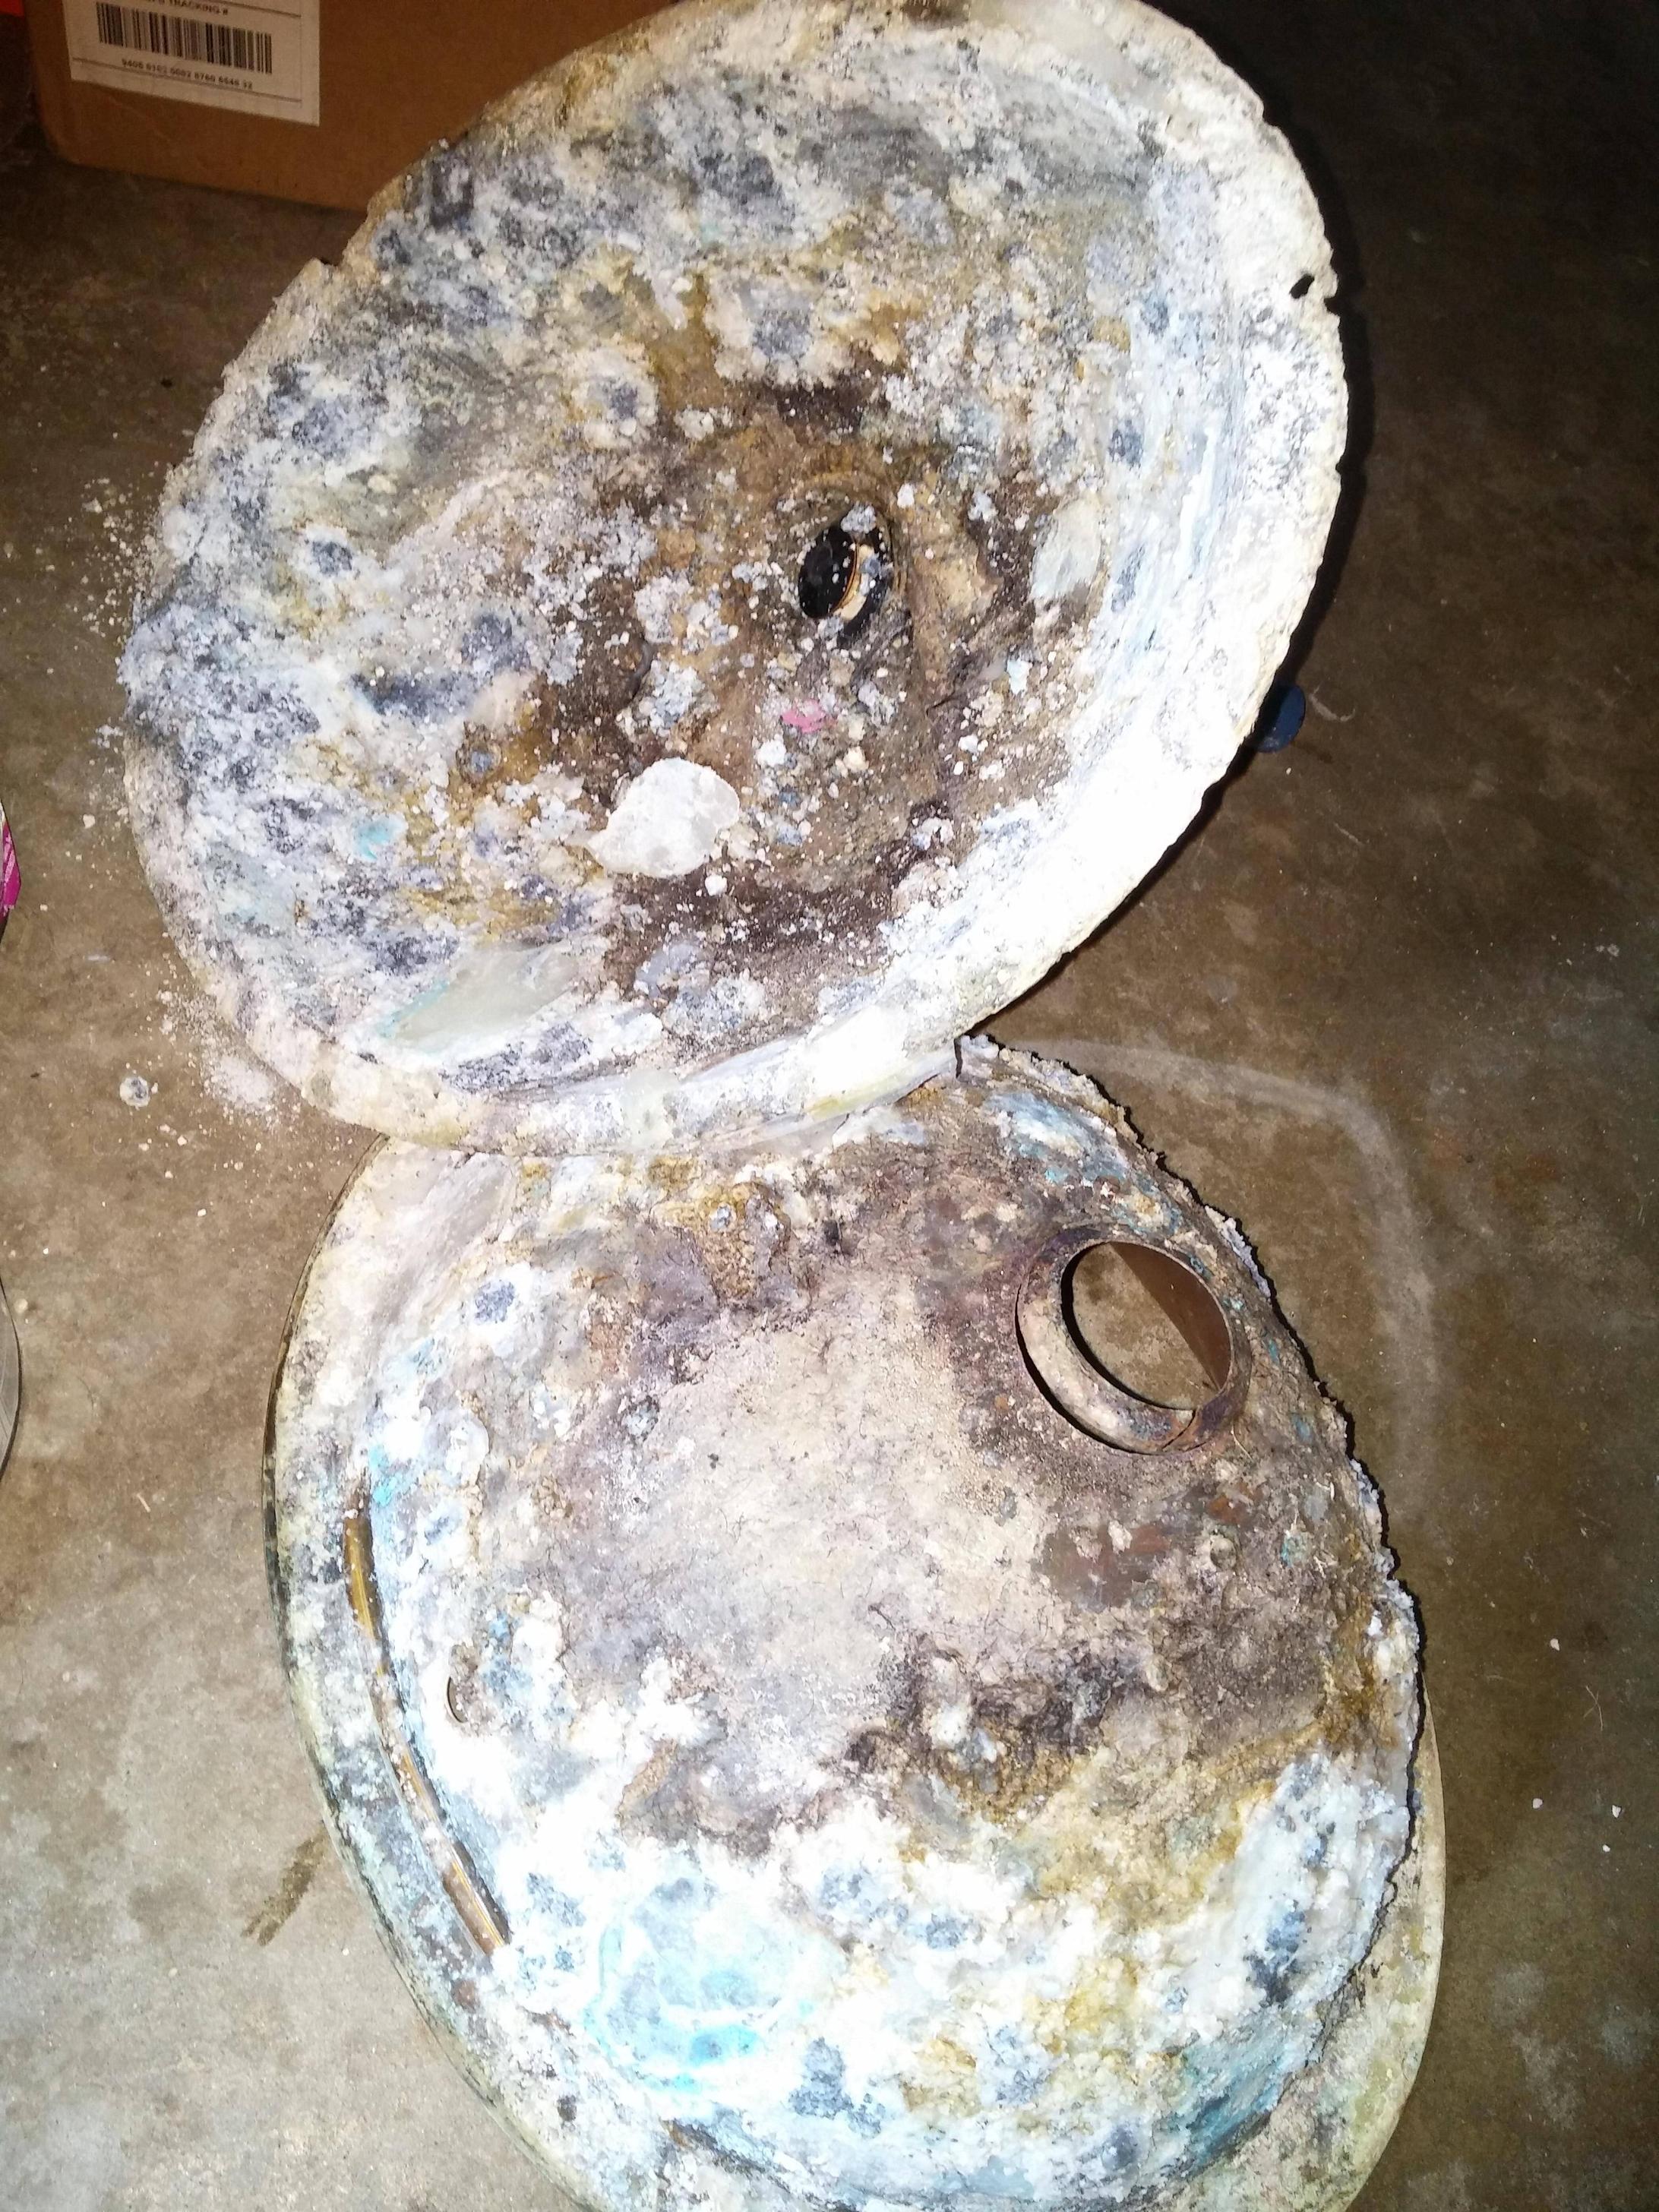 A plumbing customer was worried about a funky moldy smell in her bathroom...